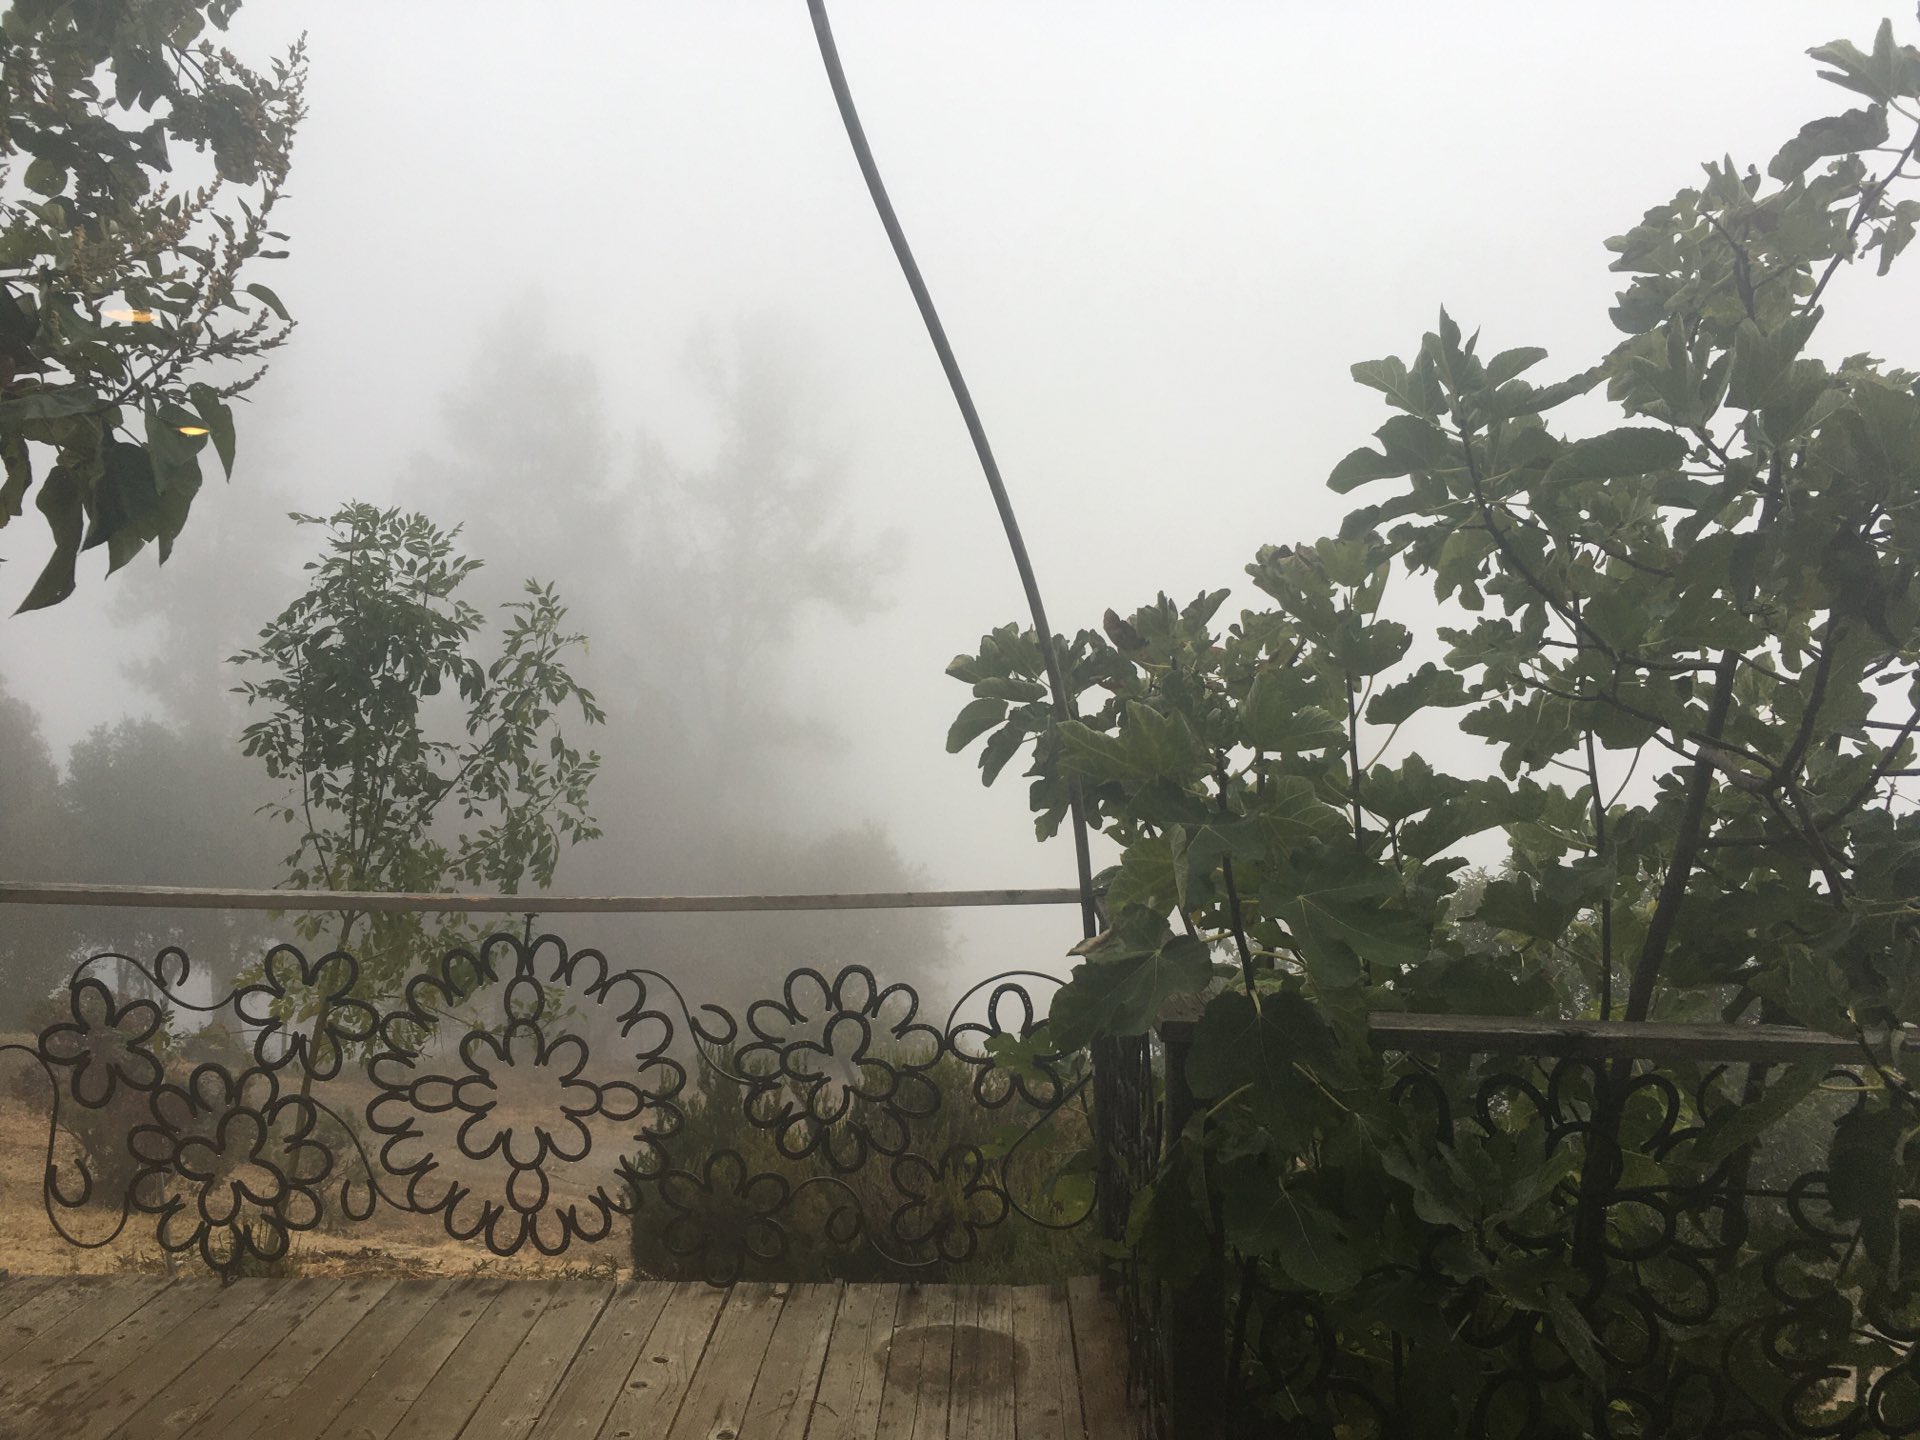 View of a deck with some green bushes visible but most things past the deck are obscured by the thick white fog.